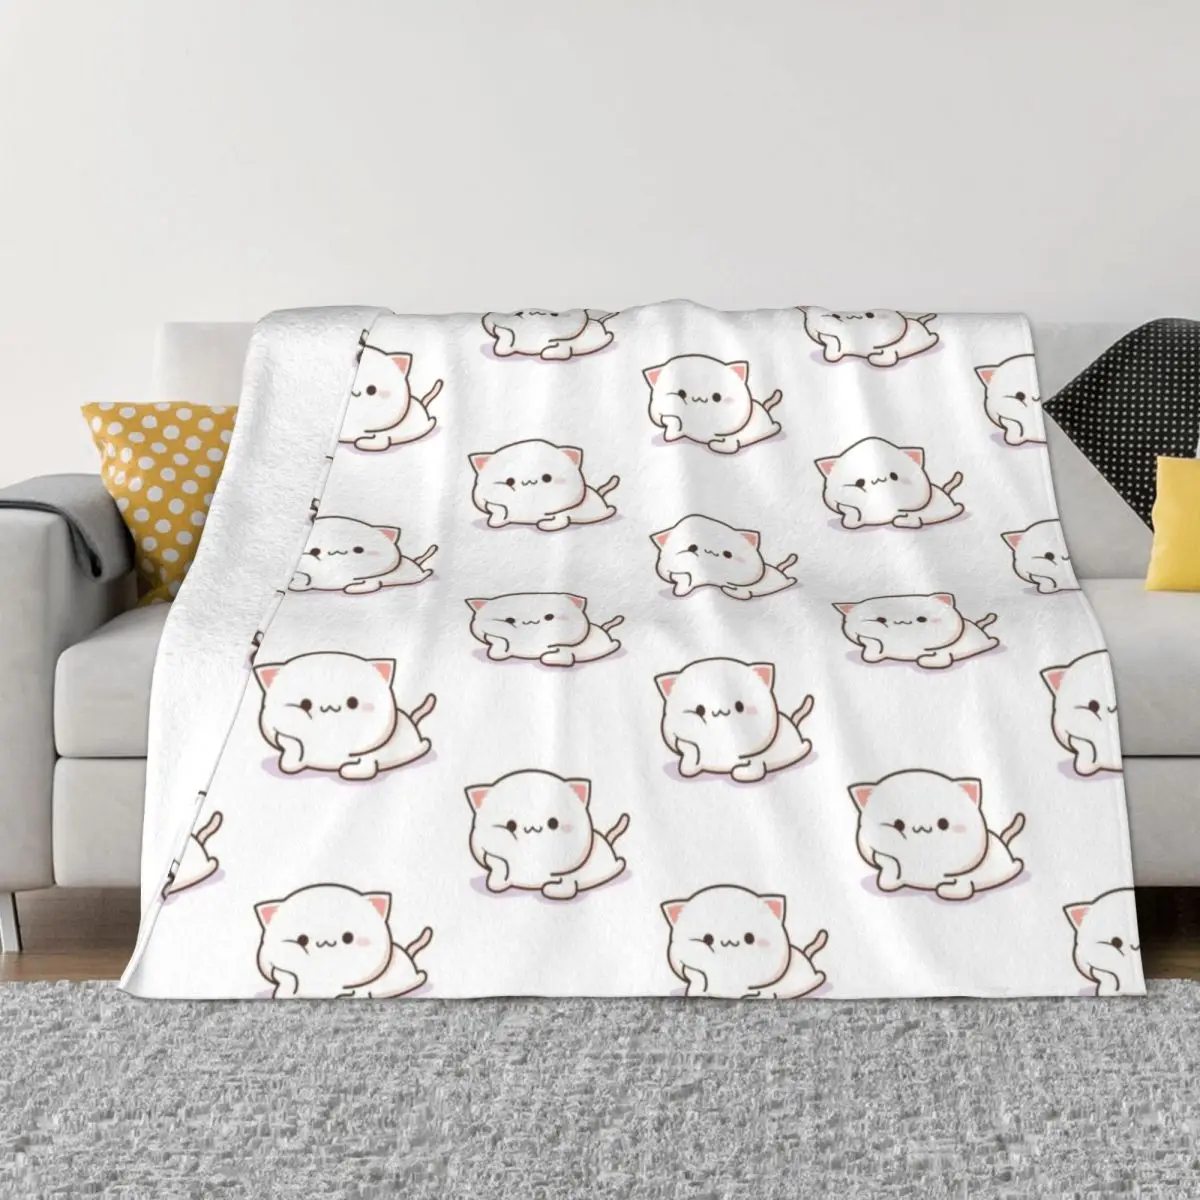 

Peach And Goma Mochi Cat Posing Blankets Velvet All Season Portable Soft Throw Blanket for Sofa Office Bedspreads